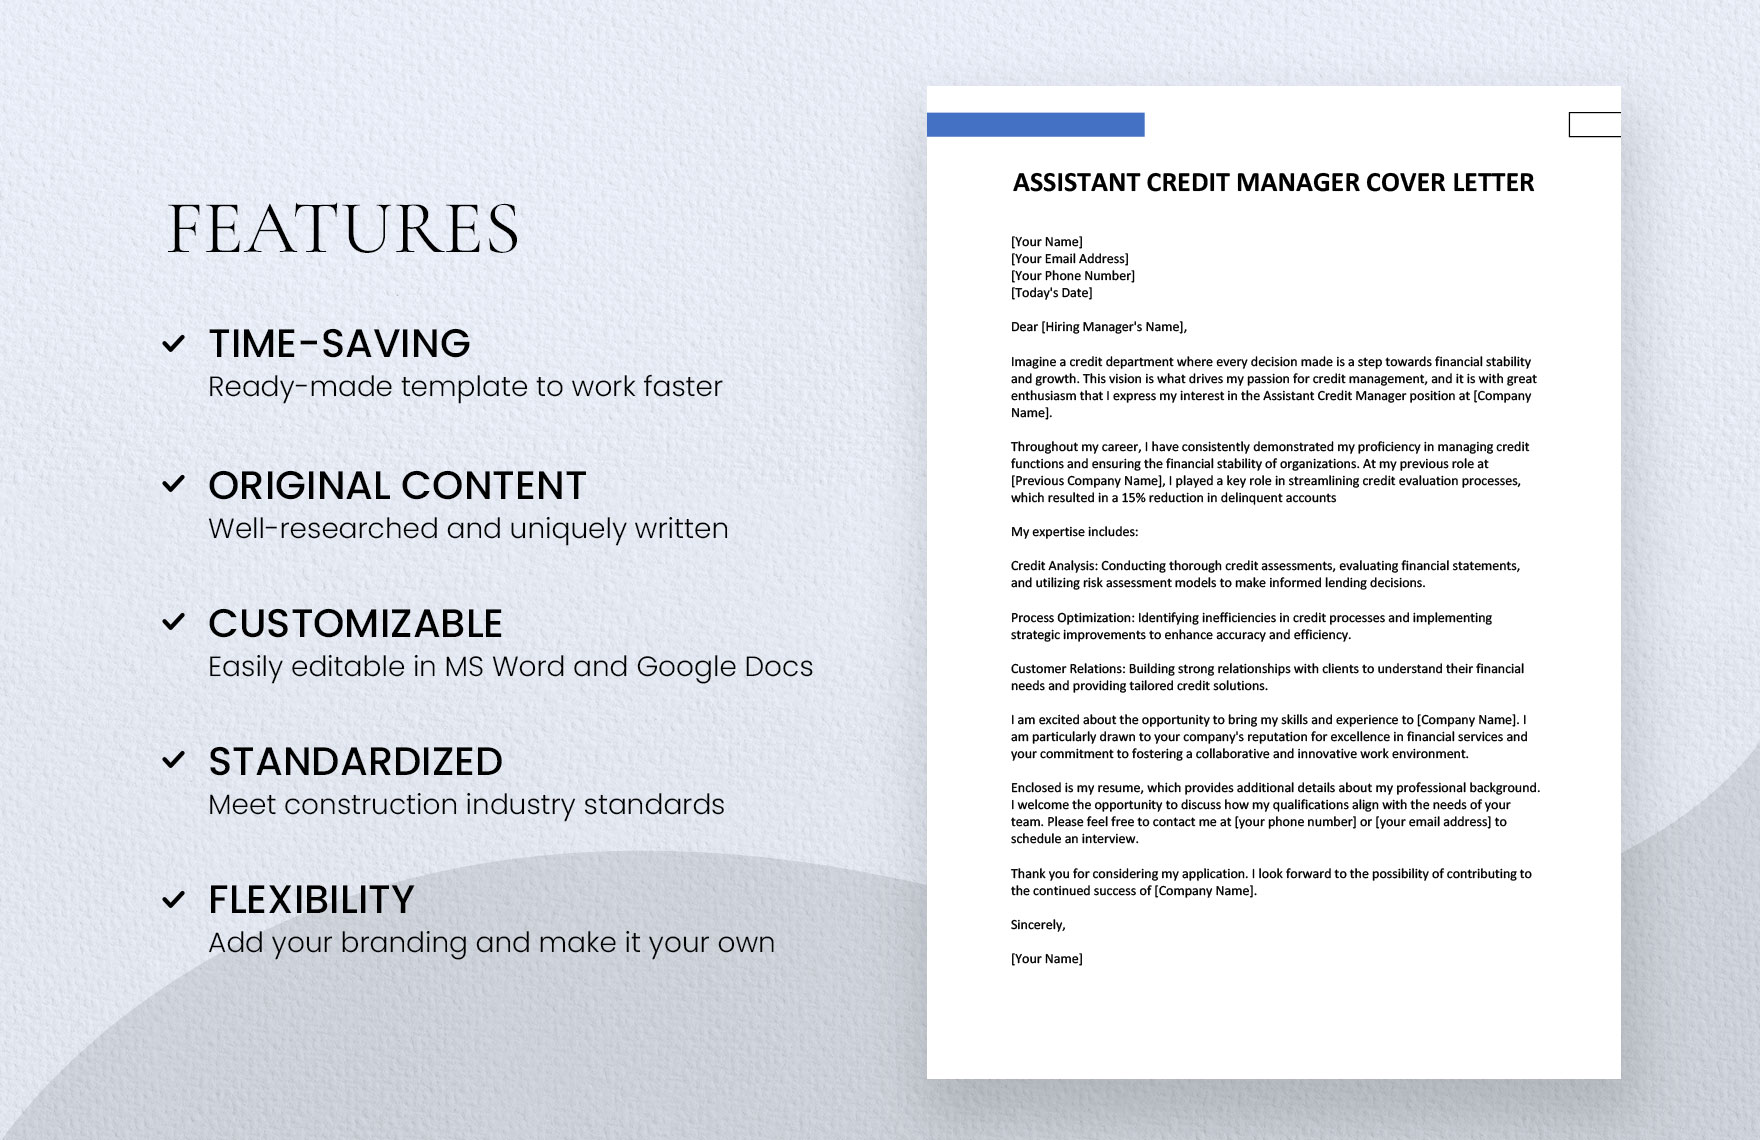 Assistant Credit Manager Cover Letter